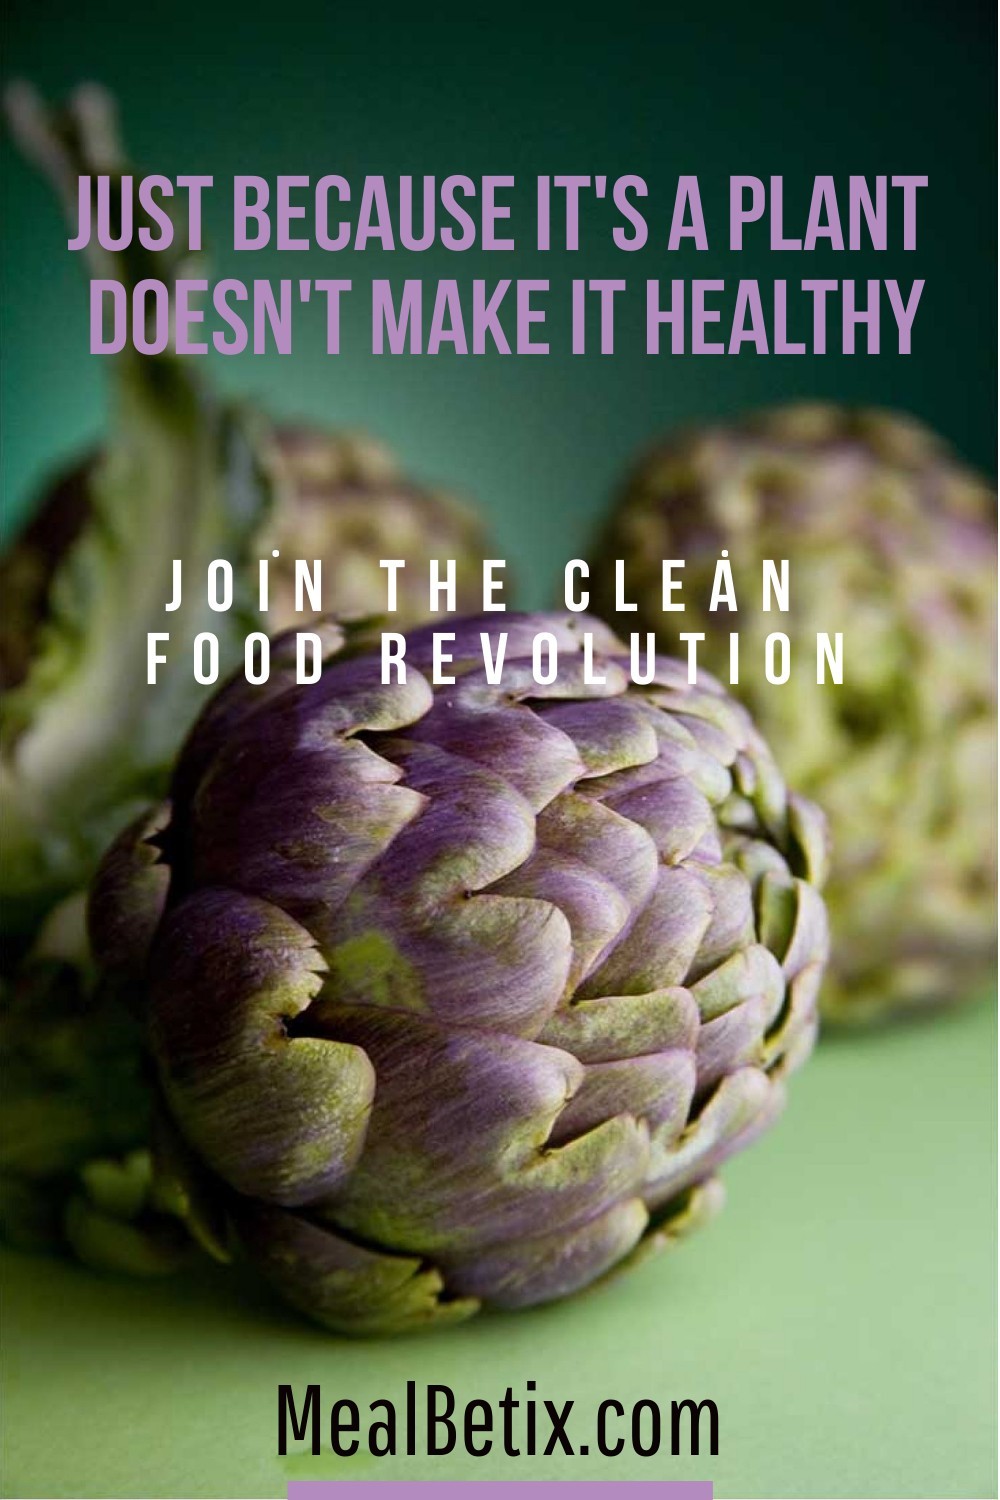 JOIN THE CLEAN FOOD REVOLUTION